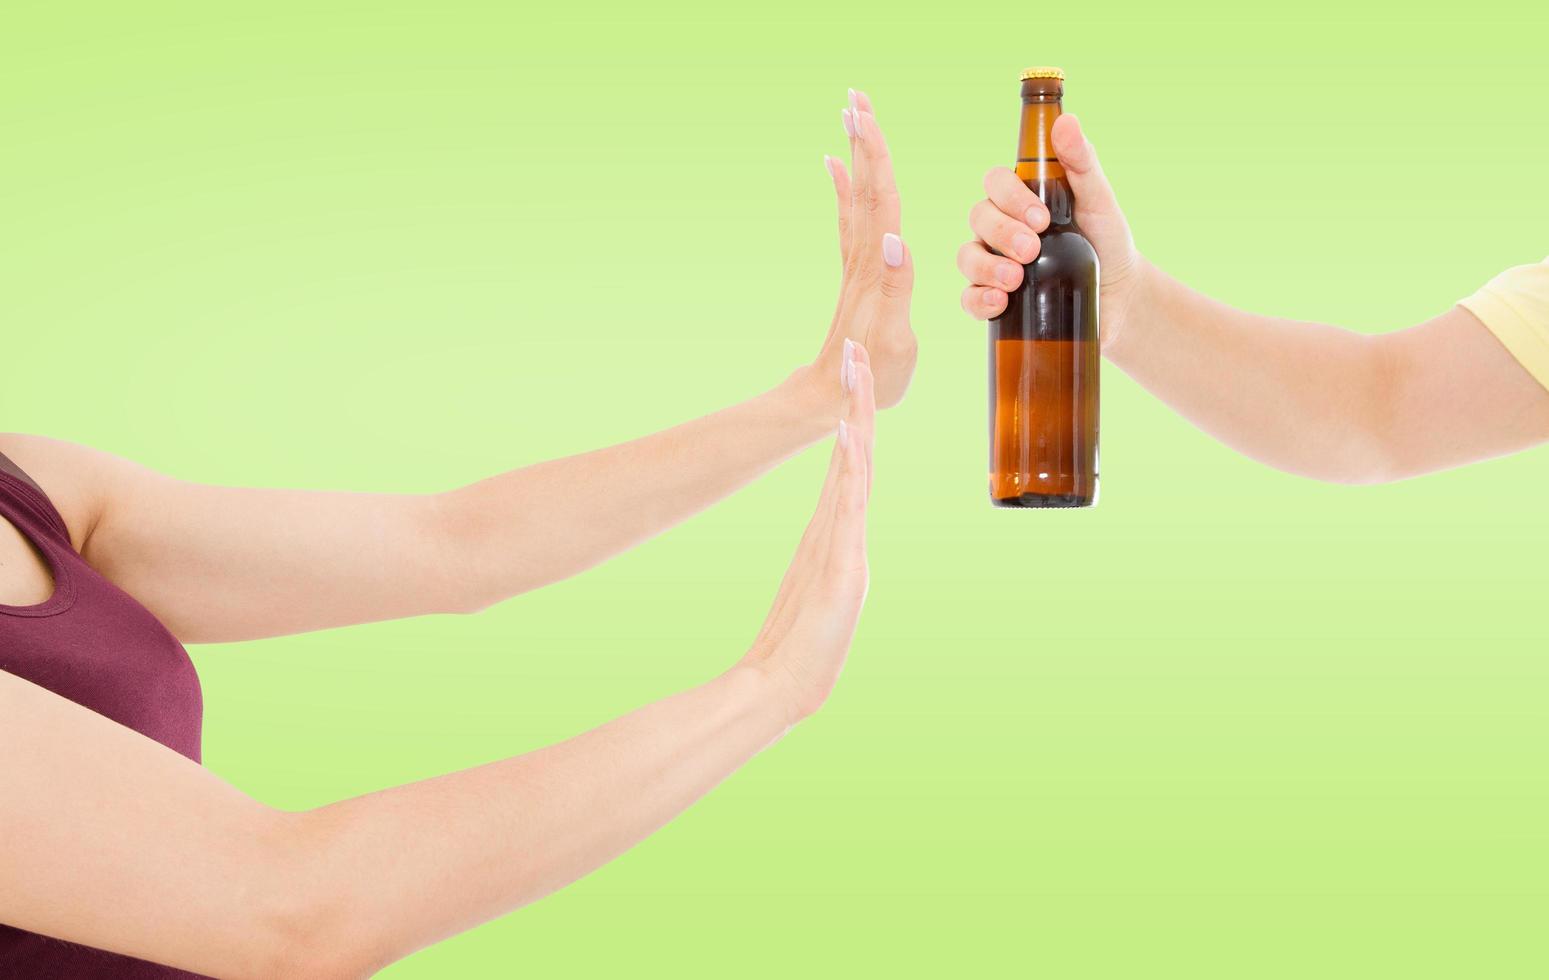 Hand rejecting alcohol isolated,anti alcohol concept, copy space. taking care of yourself,health care photo